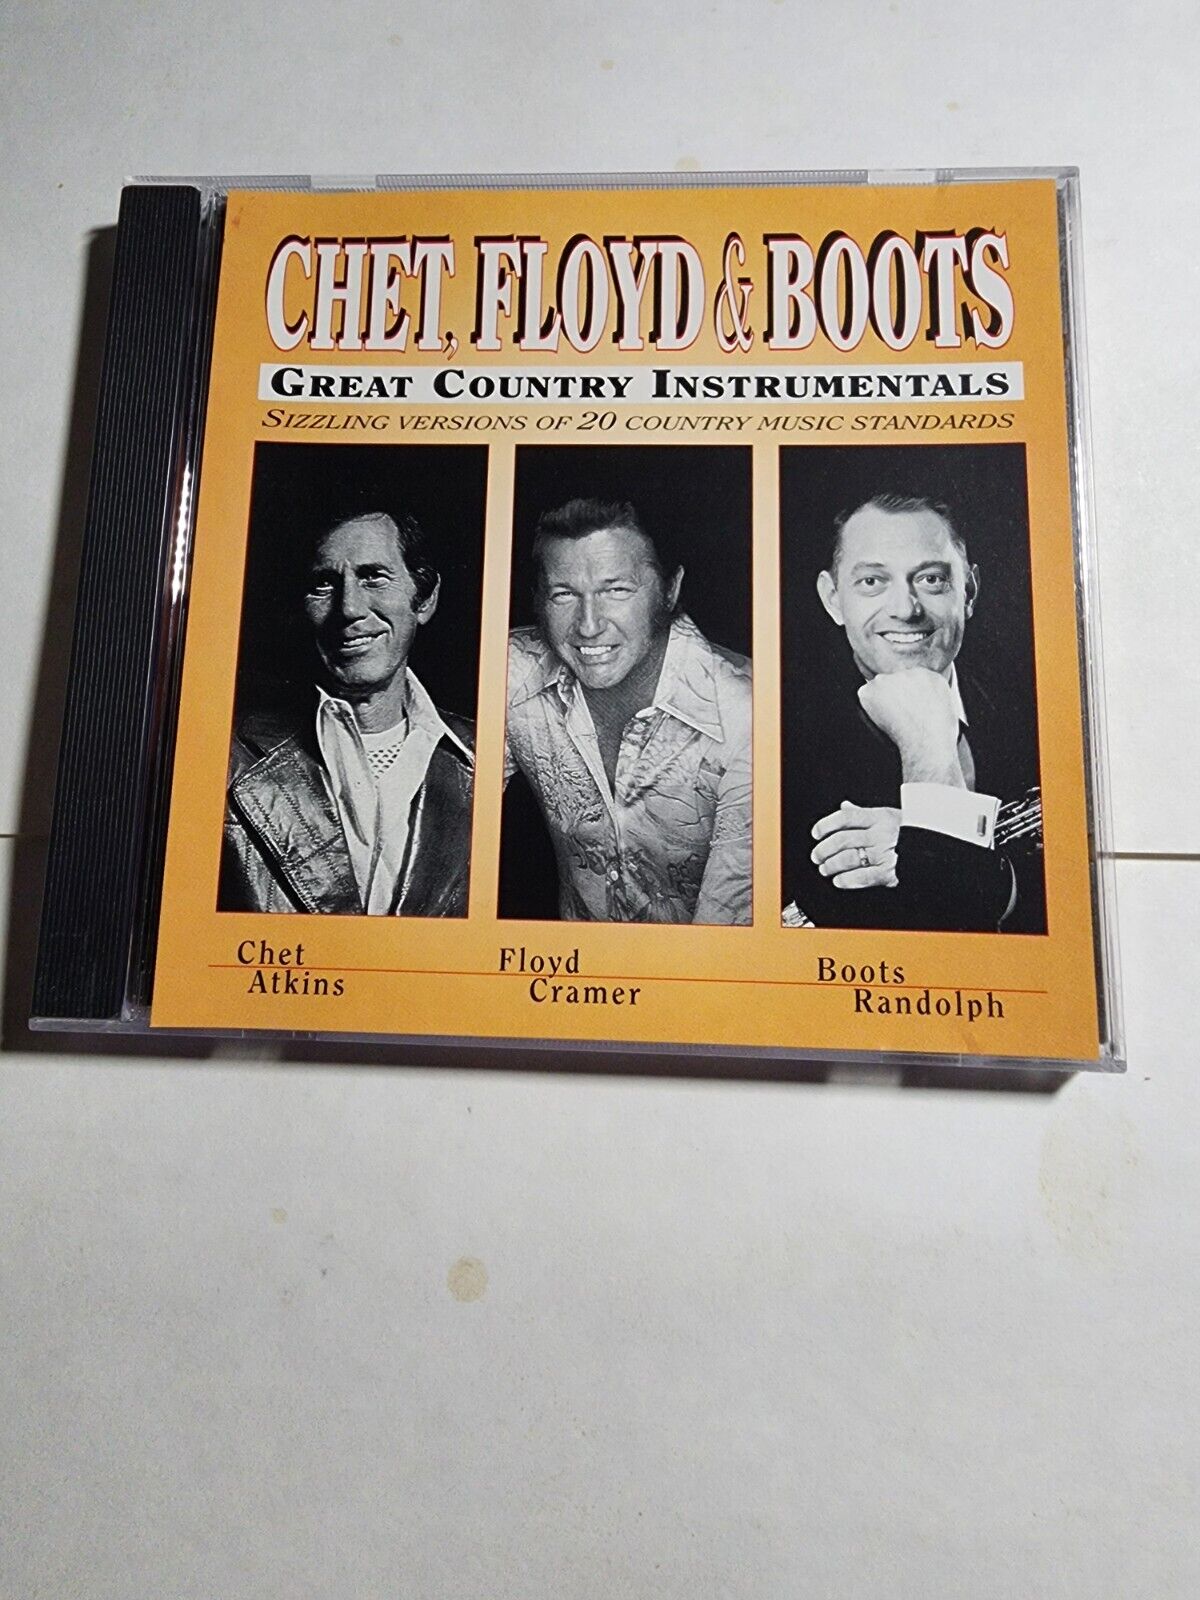 Chet, Floyd, & Boots - Great Country Instrumentals (BMG) VG+ CD44